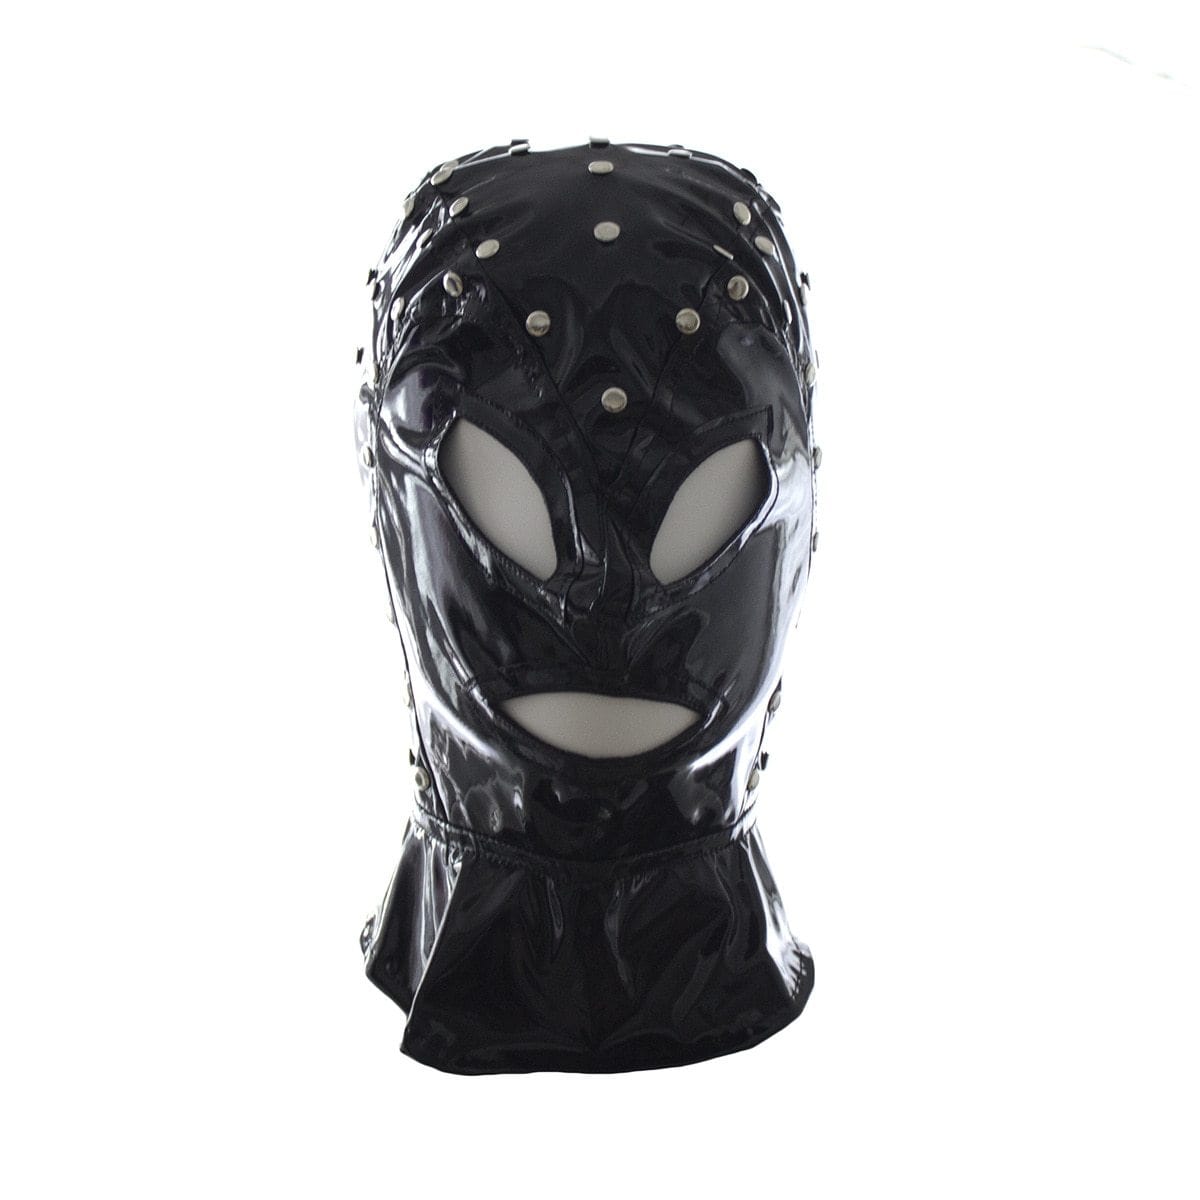 Studded Wet Look Leather Mask